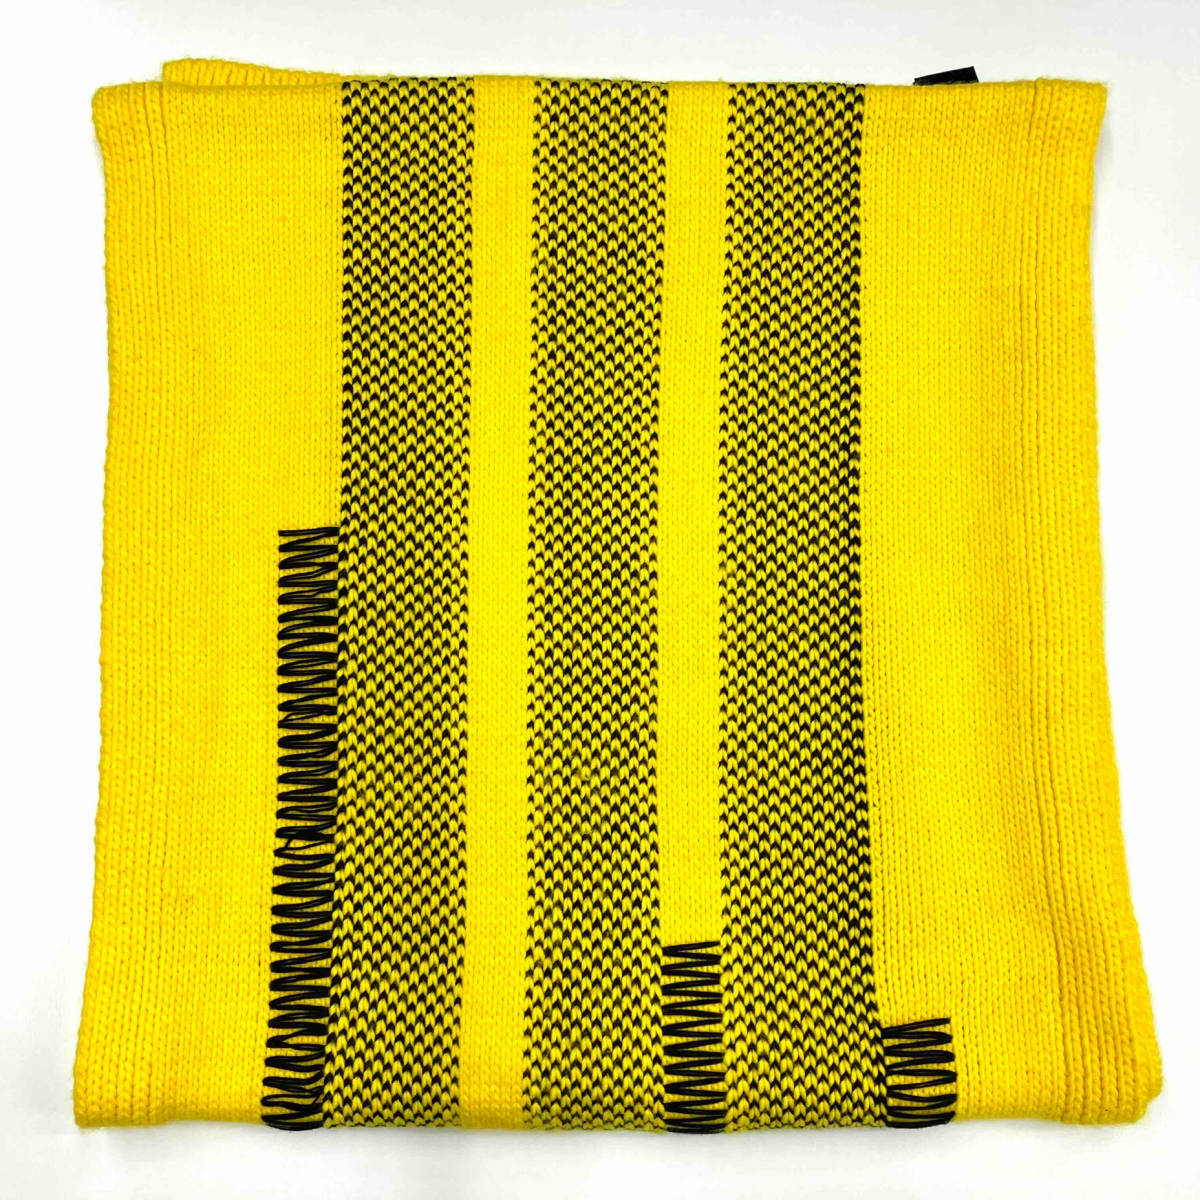 Y-3 ワイスリー KNIT SCARF DT0902 18AW 2018AW ニット スカーフ 大判 